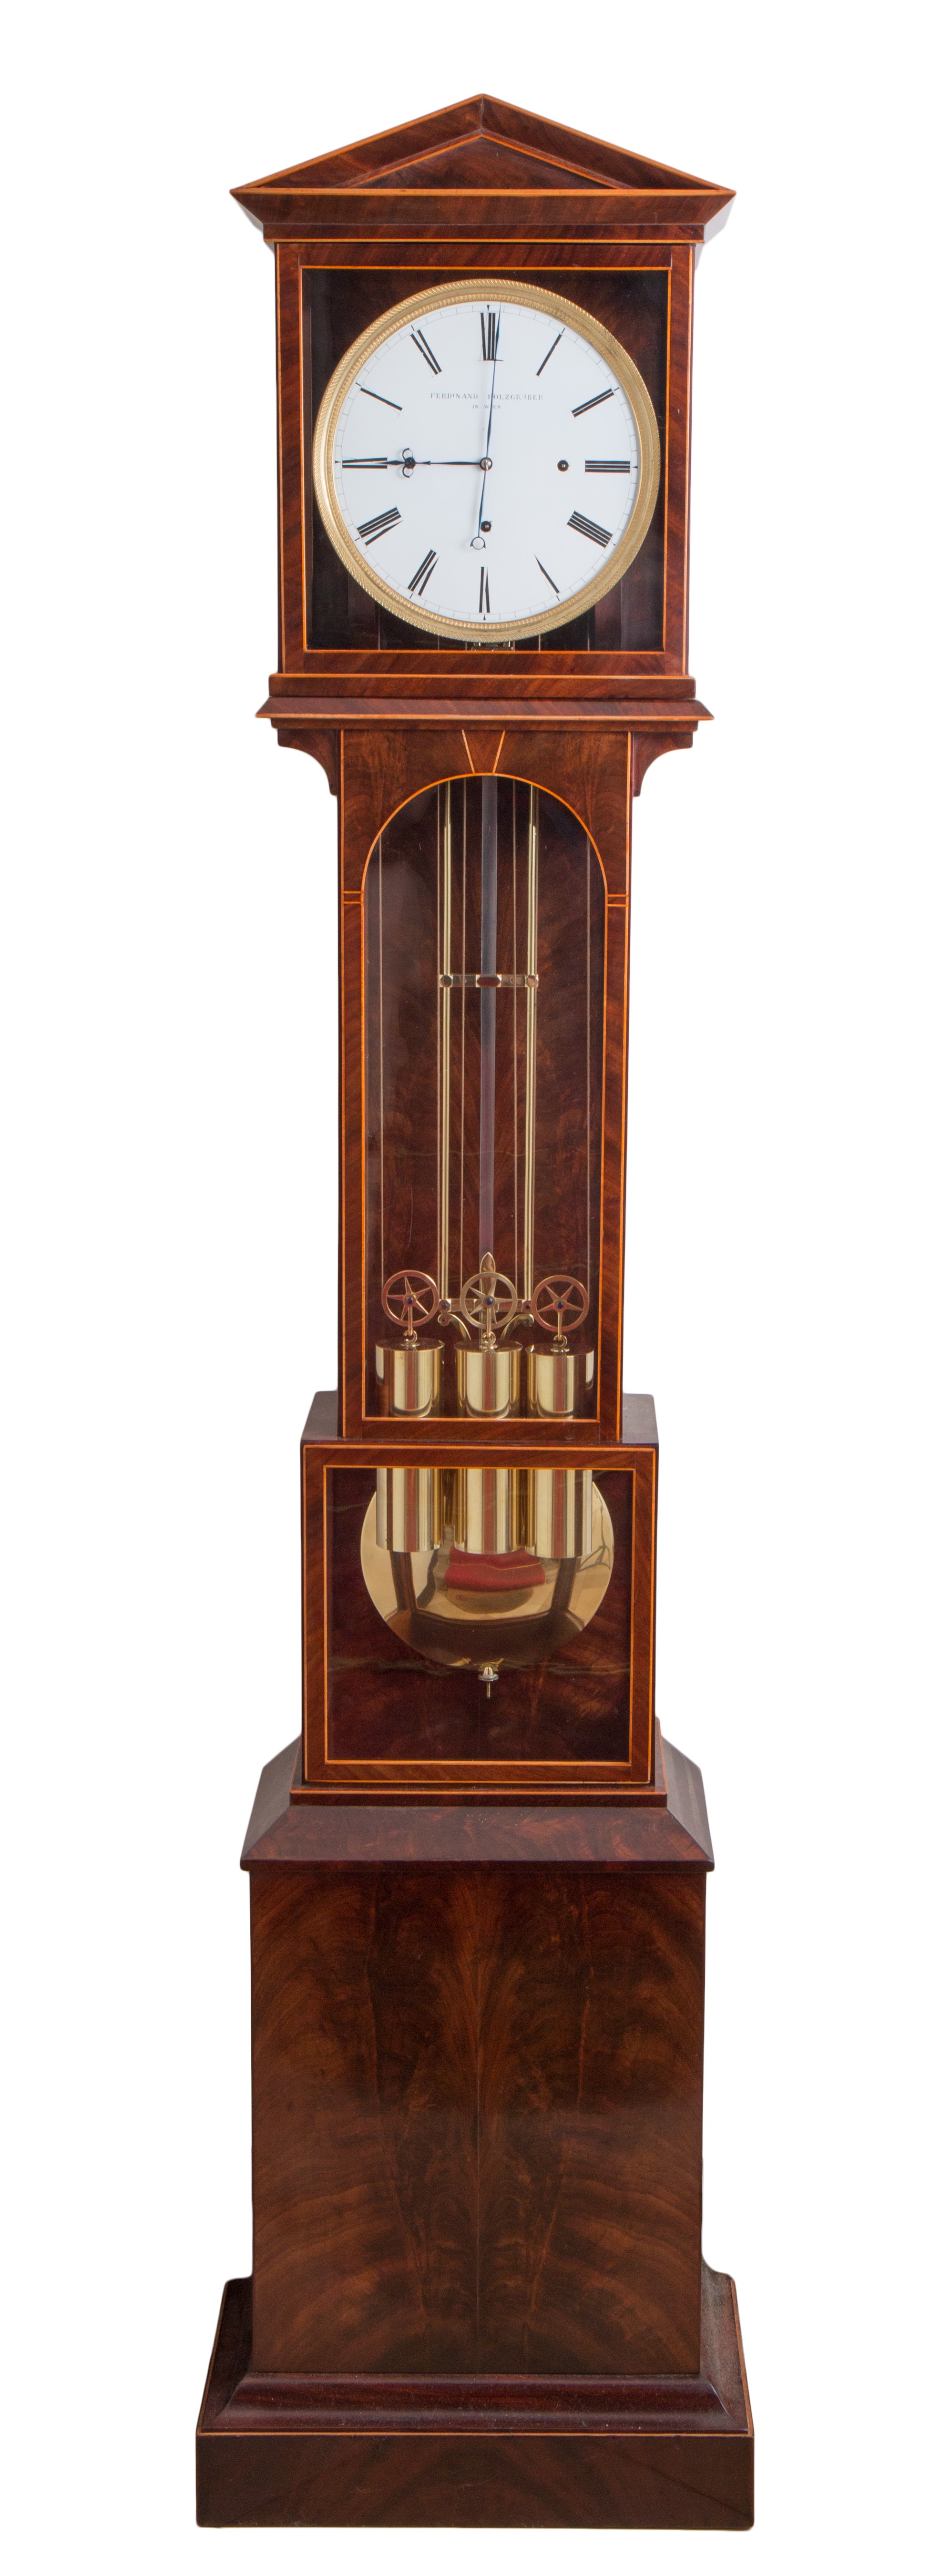 Small longcase clock by Ferdinand Holzgruber with 1 month duration, c. 1830.